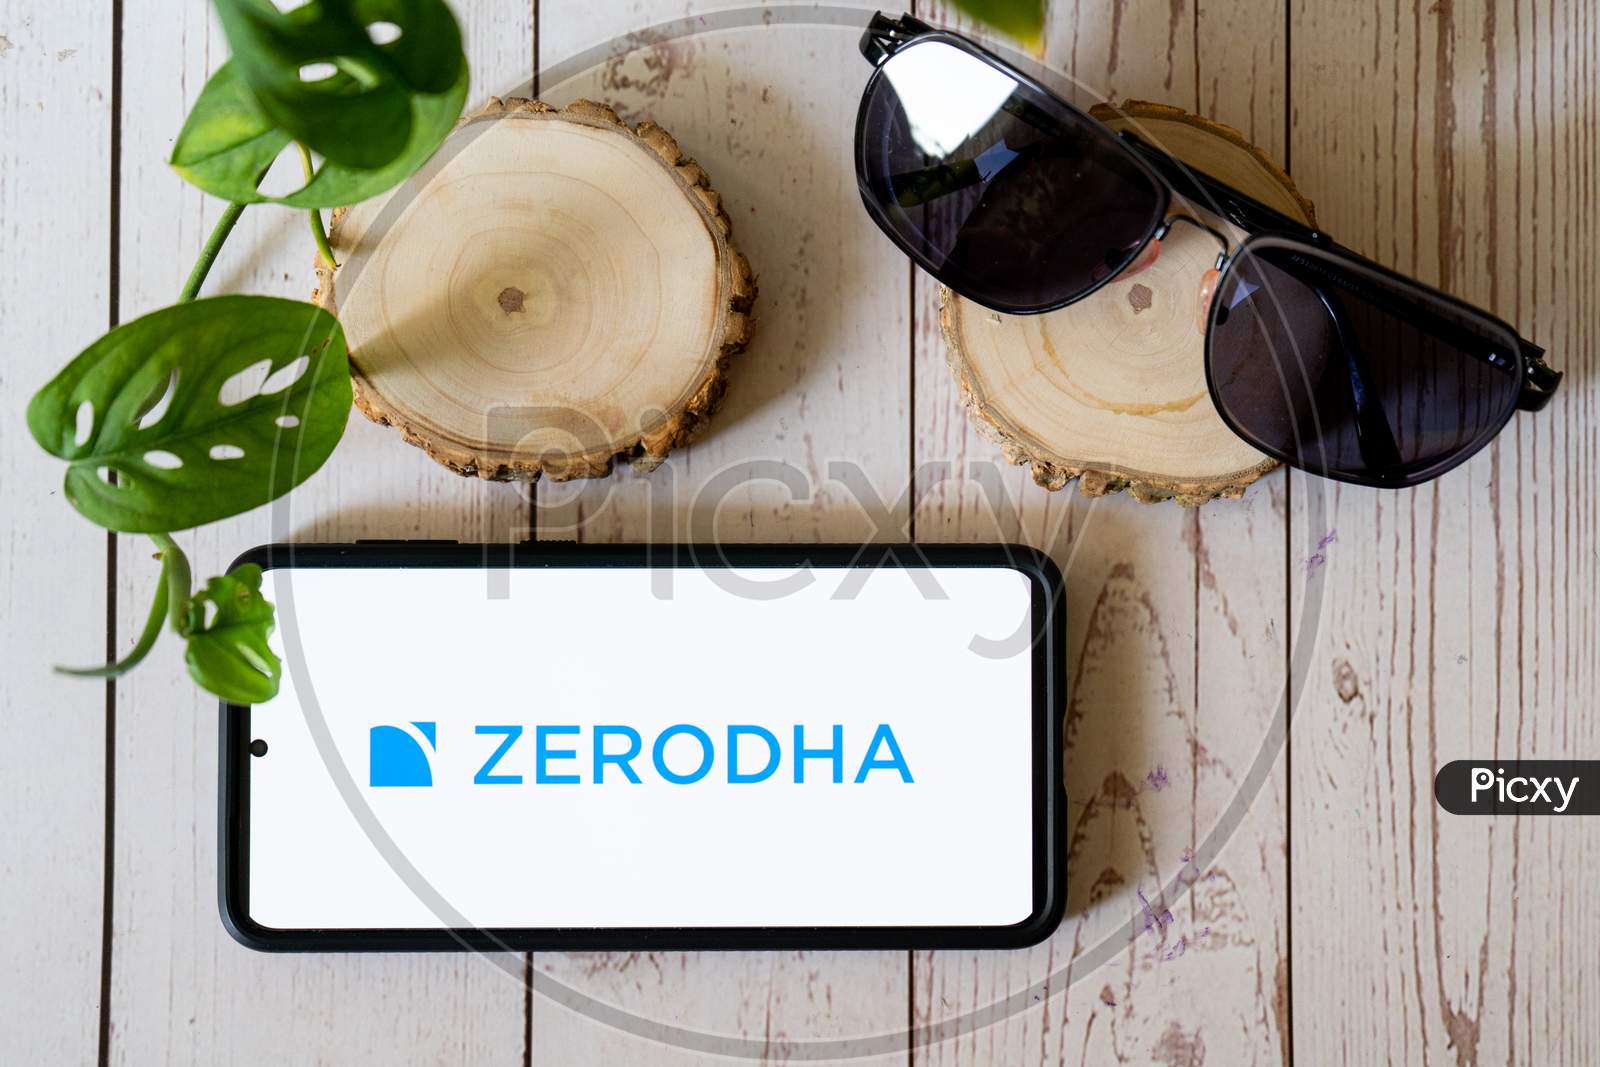 Indian Stock Trading Investing App Zerodha Using Low Free Brokerage Is The Largest Player In The Country Being A Startup Unicorn And Recently Founded Company